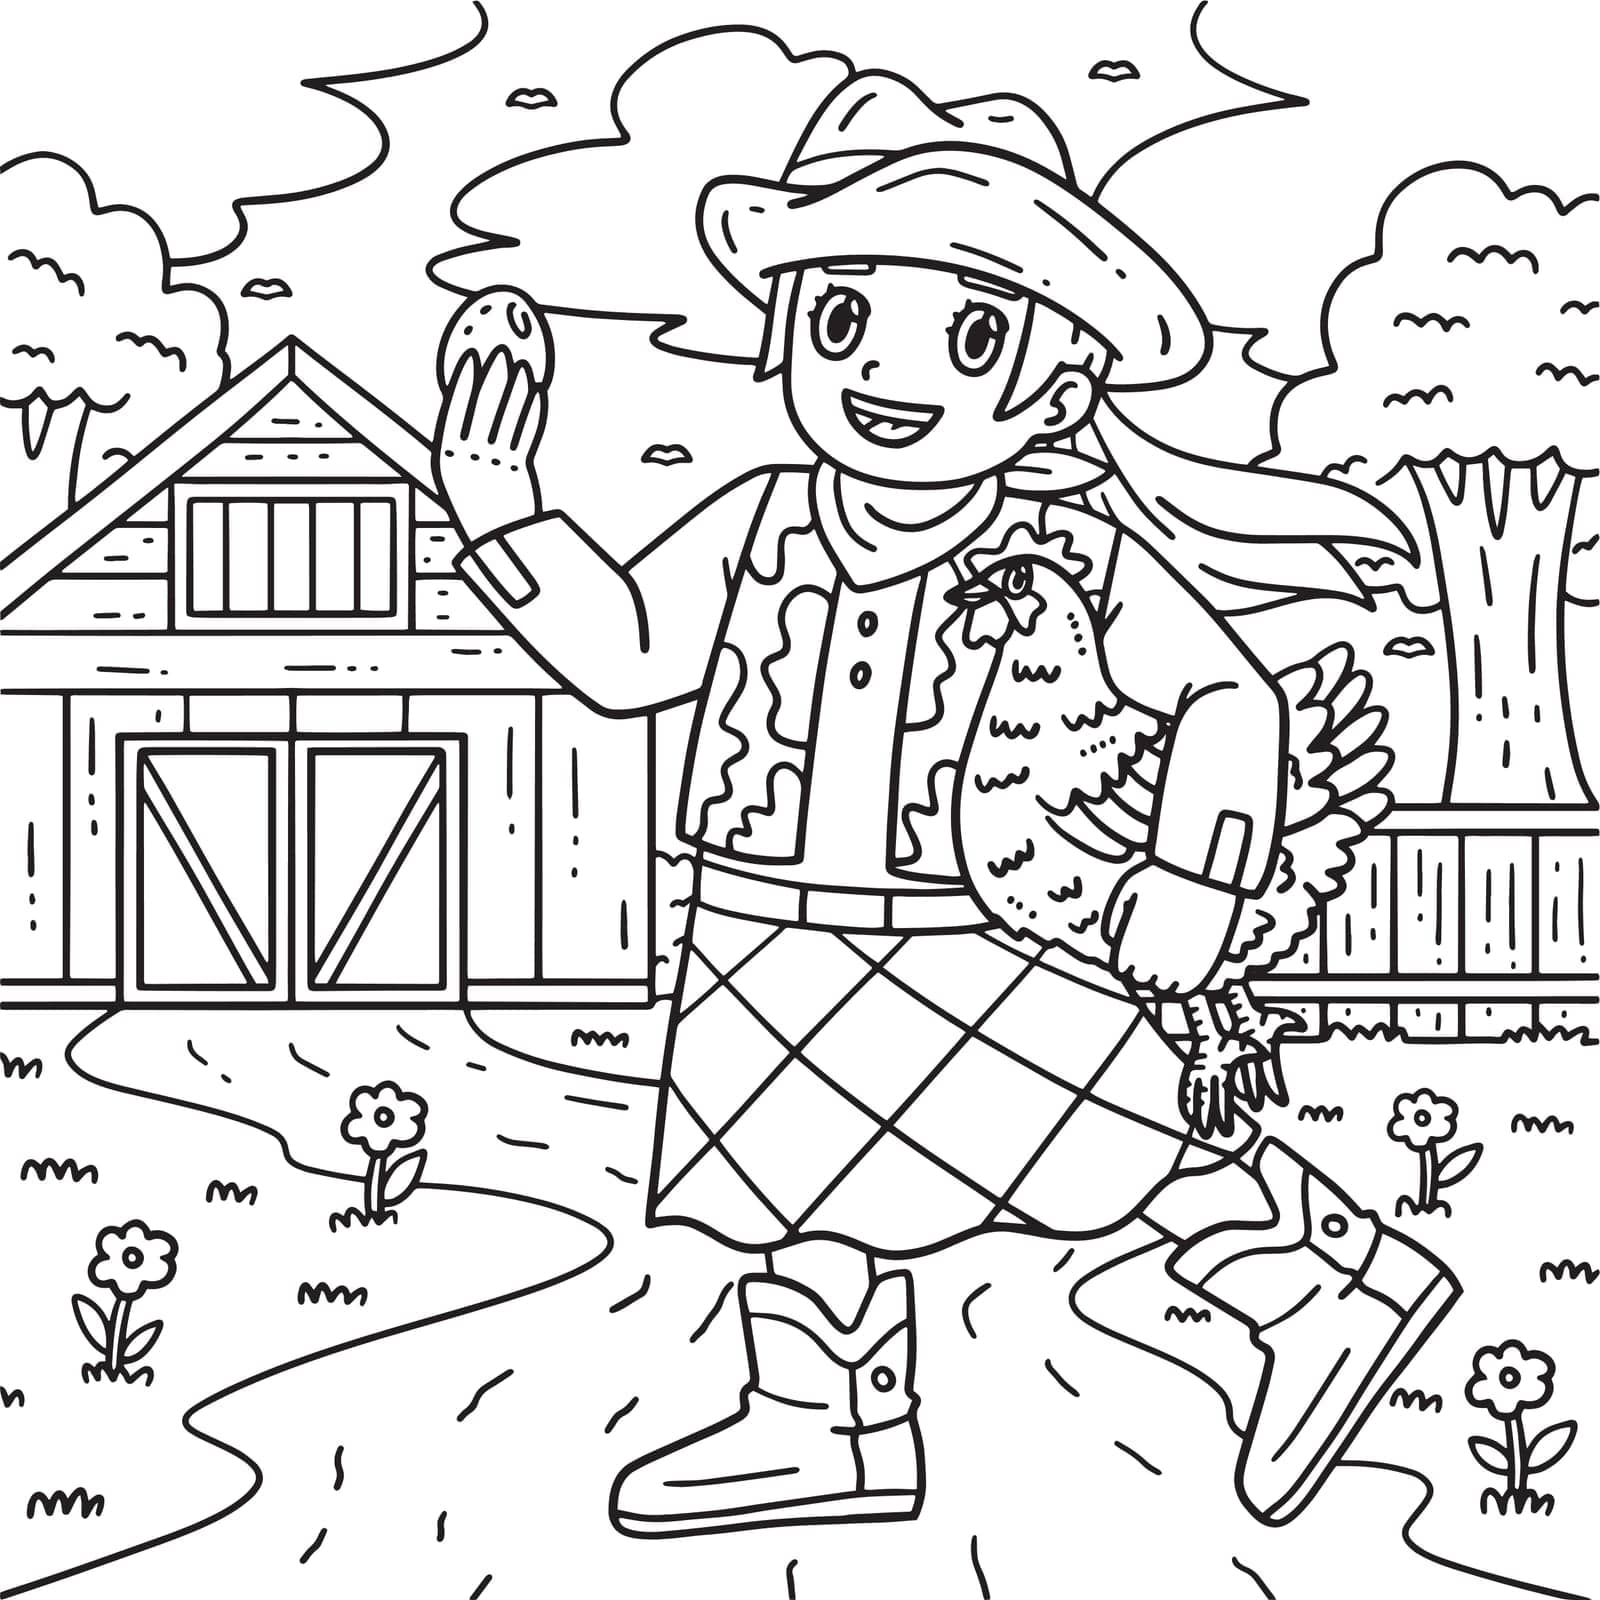 A cute and funny coloring page of a Cowgirl Carrying Chicken. Provides hours of coloring fun for children. To color, this page is very easy. Suitable for little kids and toddlers.